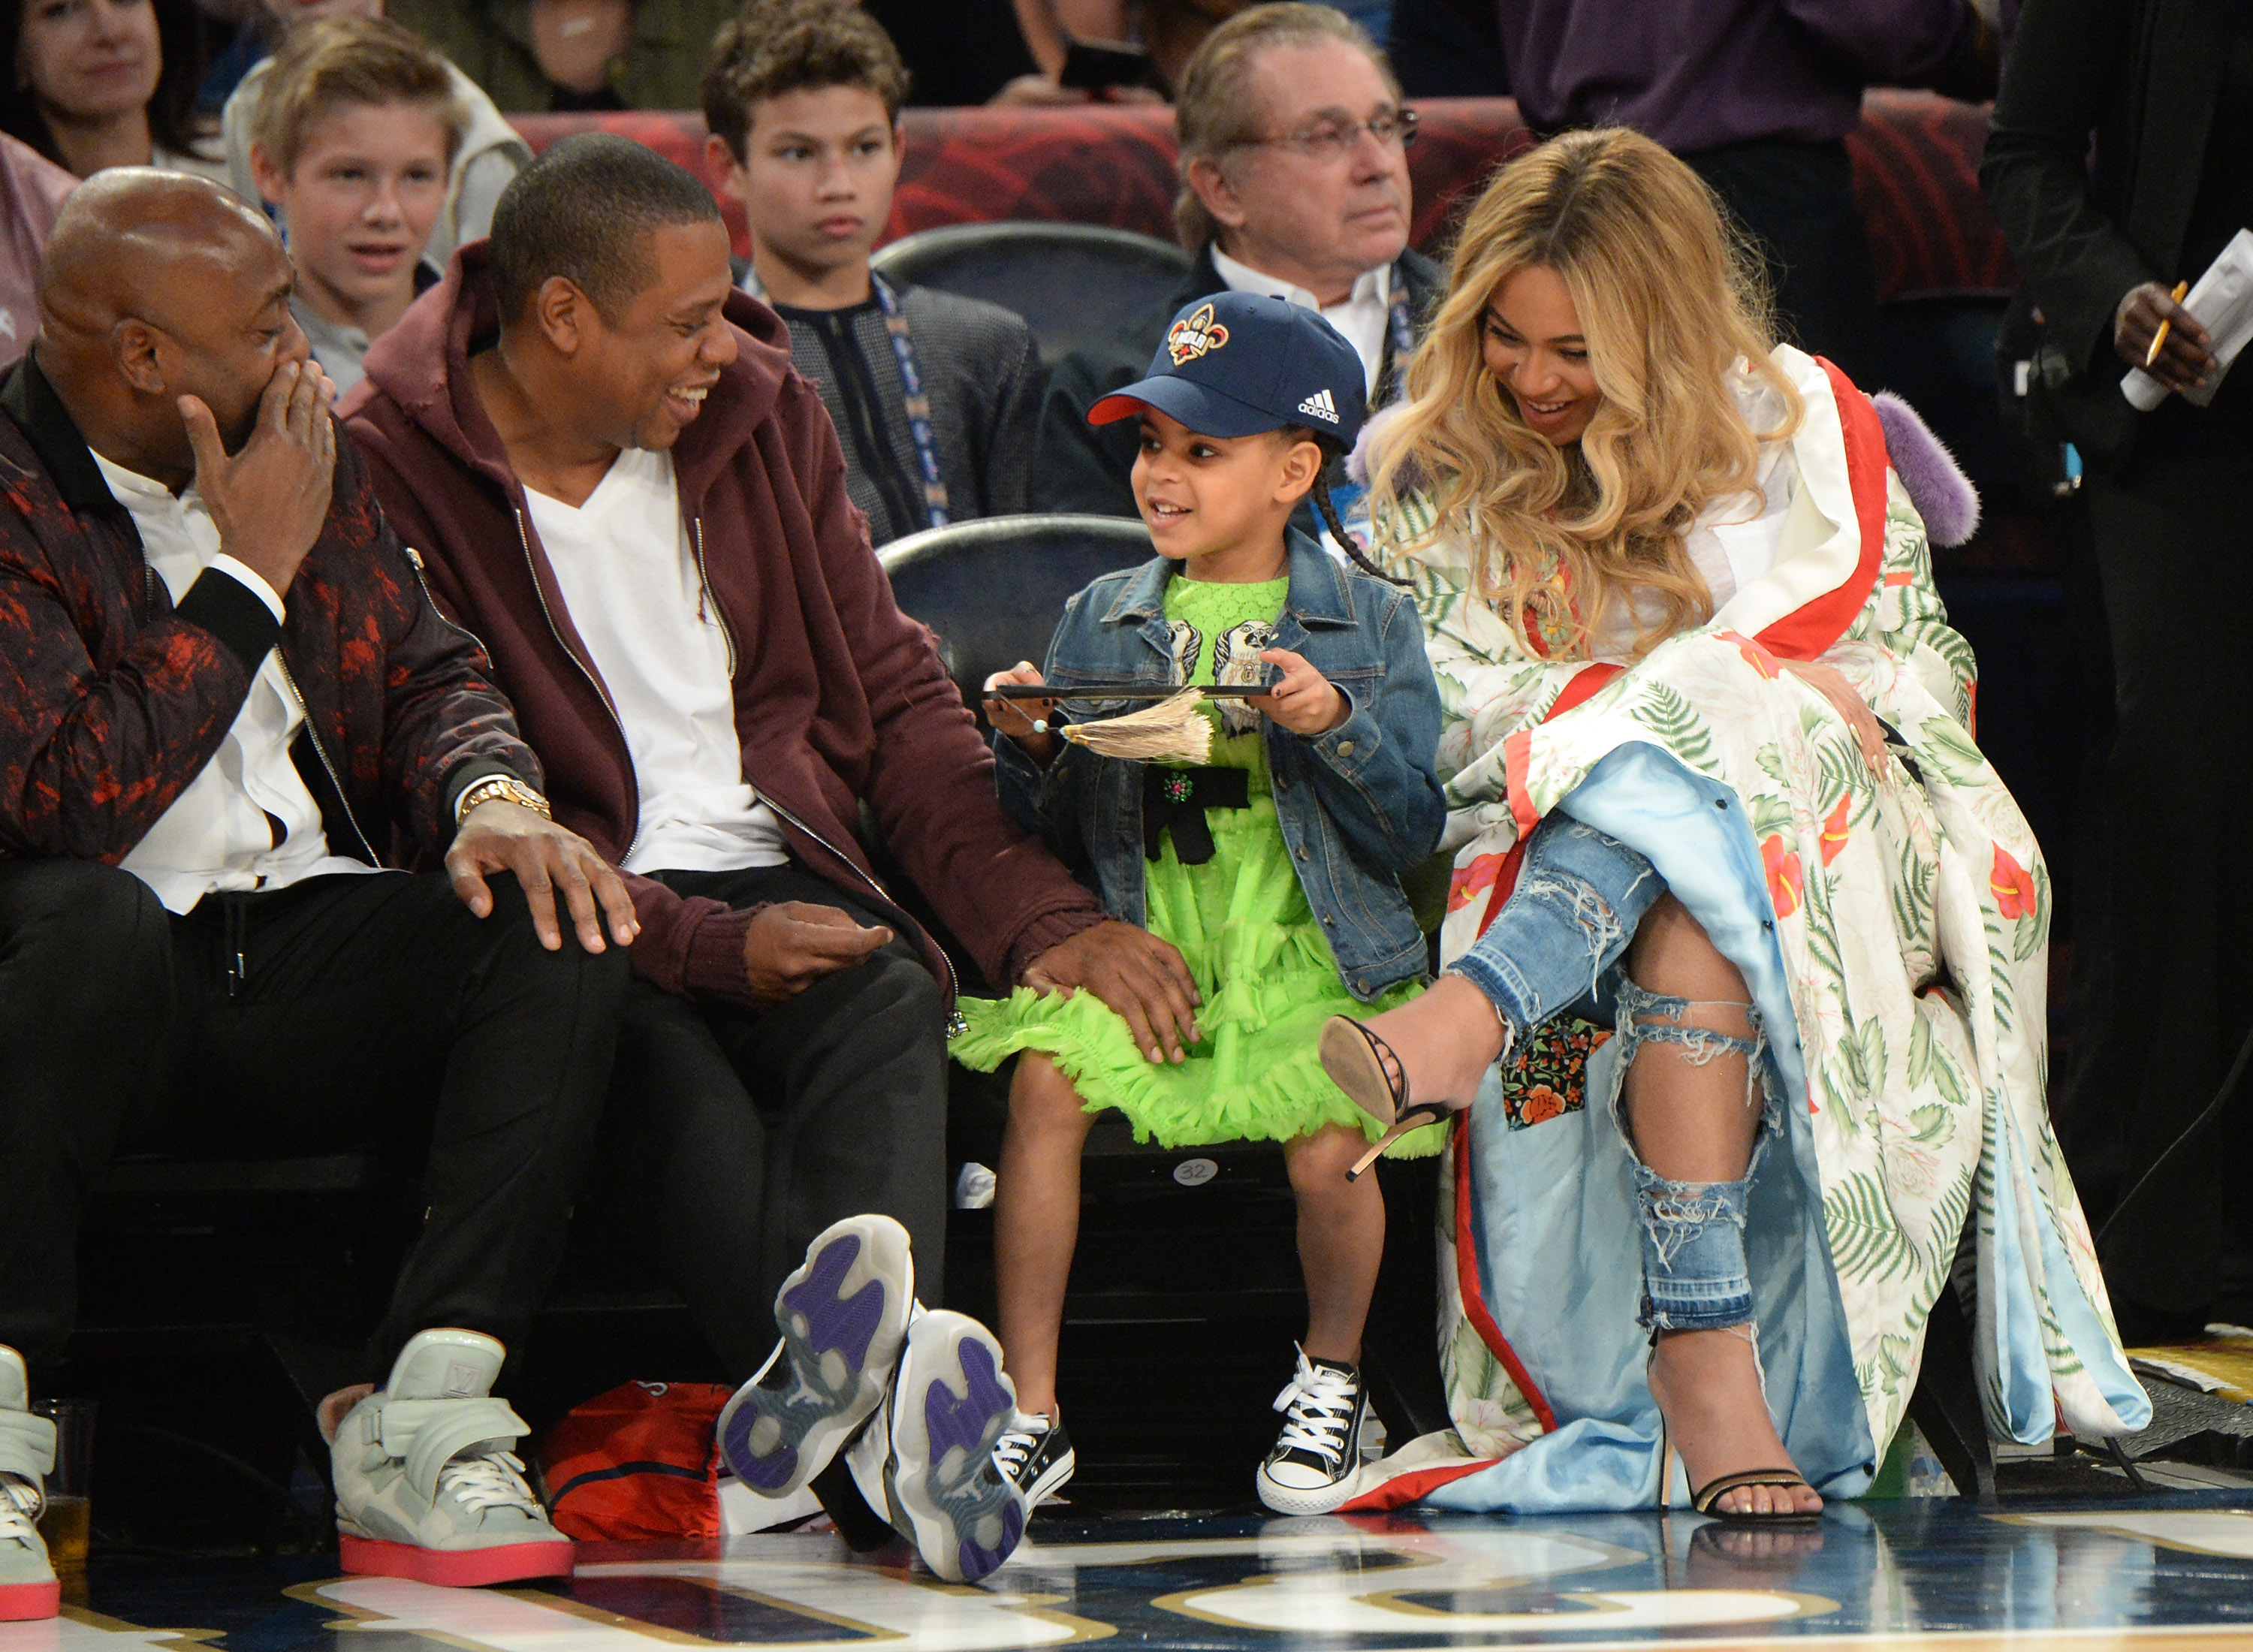 NEW ORLEANS, LA - FEBRUARY 19:  Jay Z, Blue Ivy Carter and Beyonce Knowles attend the 66th NBA All-Star Game at Smoothie King Center on February 19, 2017 in New Orleans, Louisiana. 